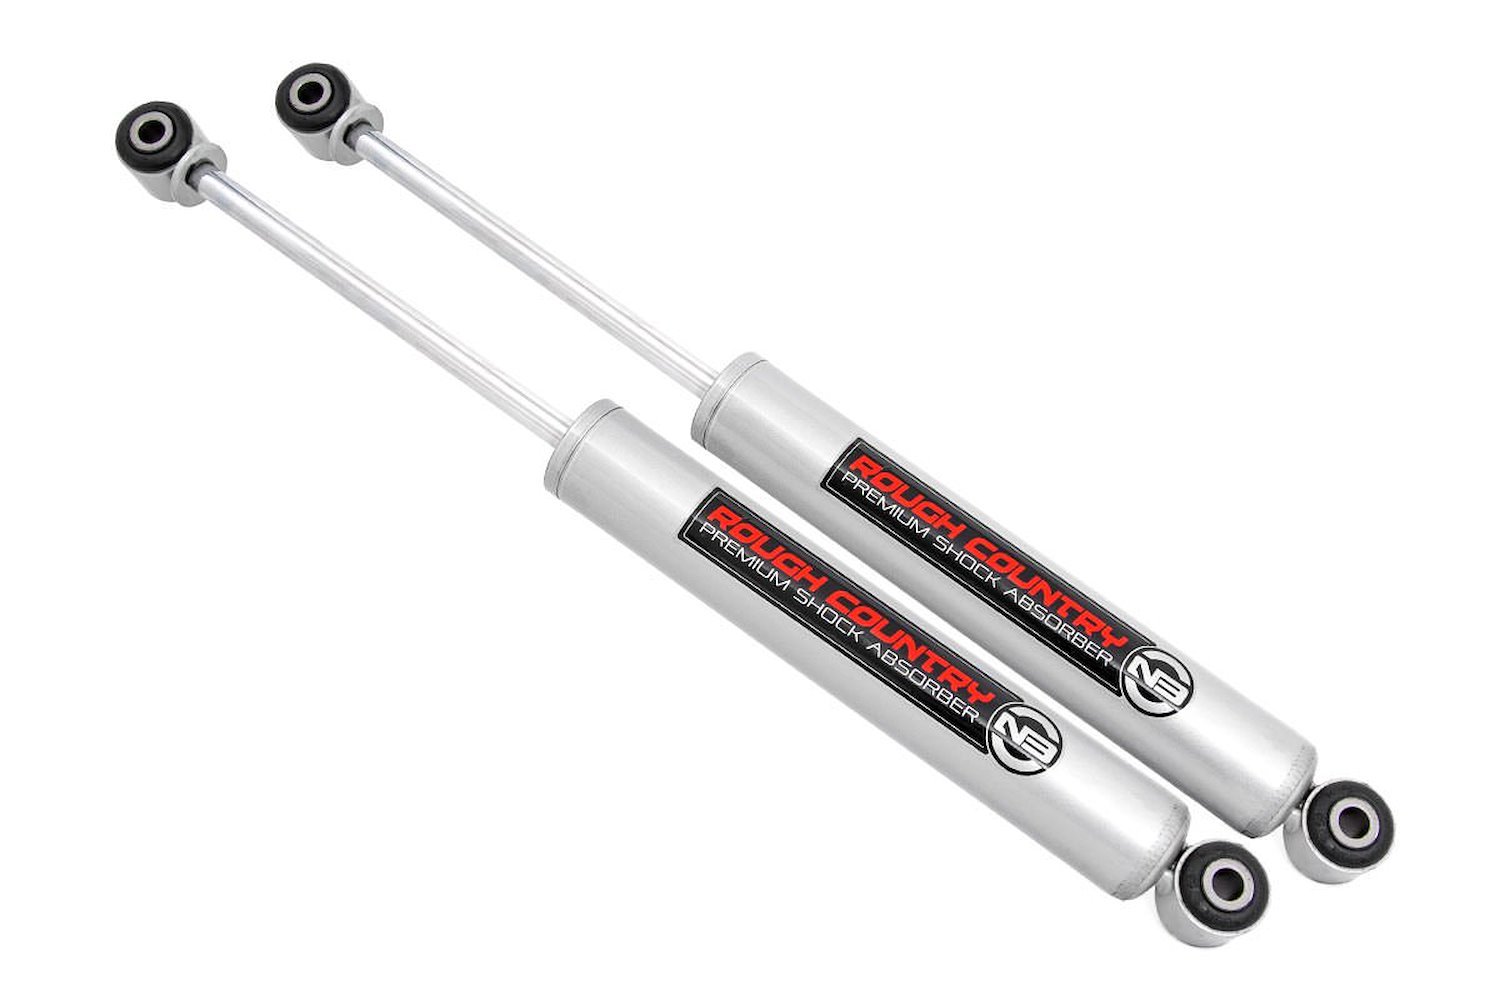 23180_B Chevy/GMC S10/S15 Pickup 4WD (82-04) N3 Front Shocks (Pair), 2.5-3.5"